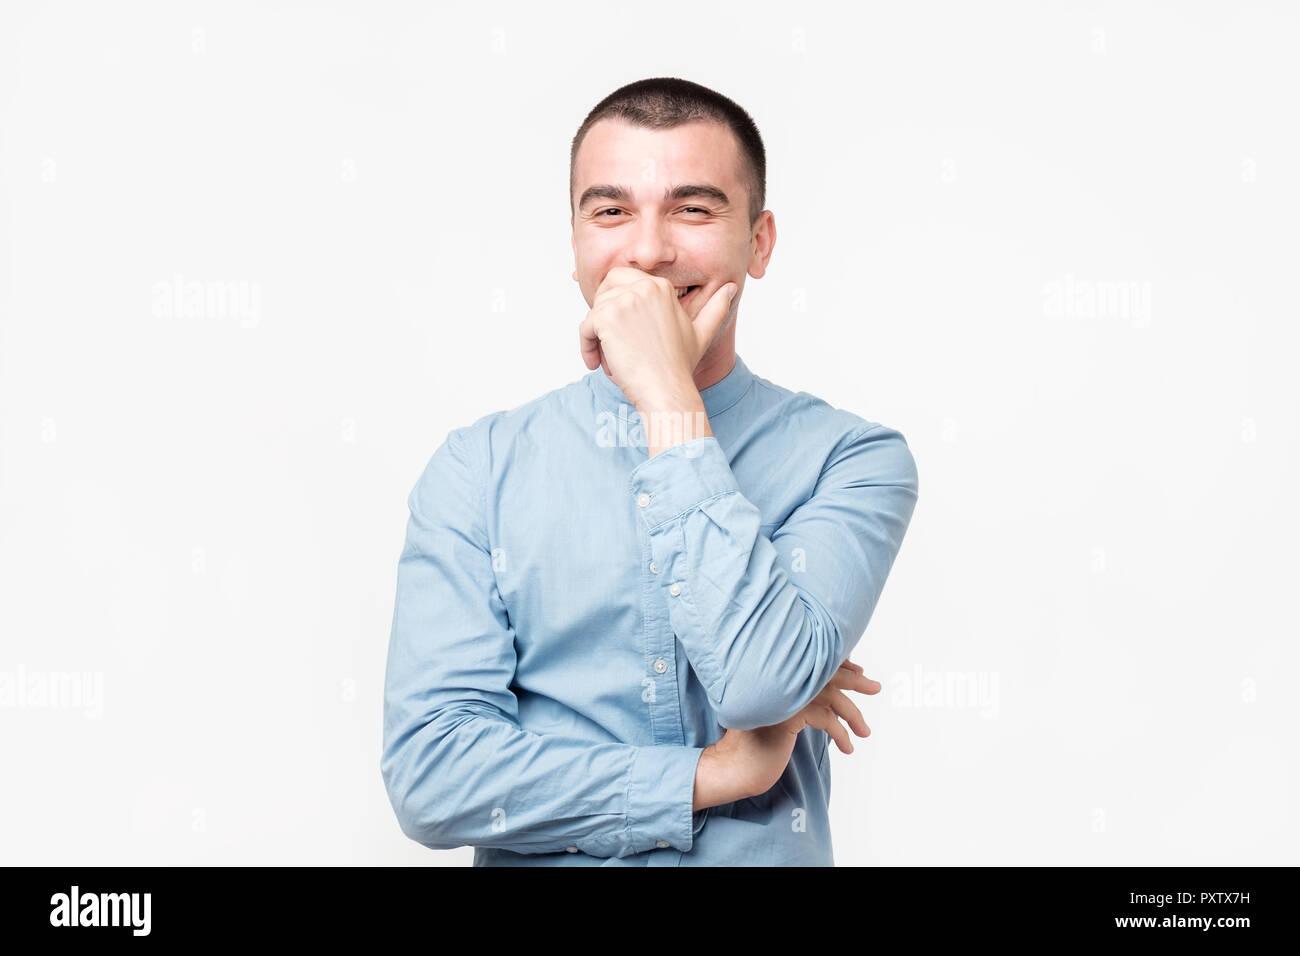 Hispanic young man with laugh face on grey background. Stock Photo